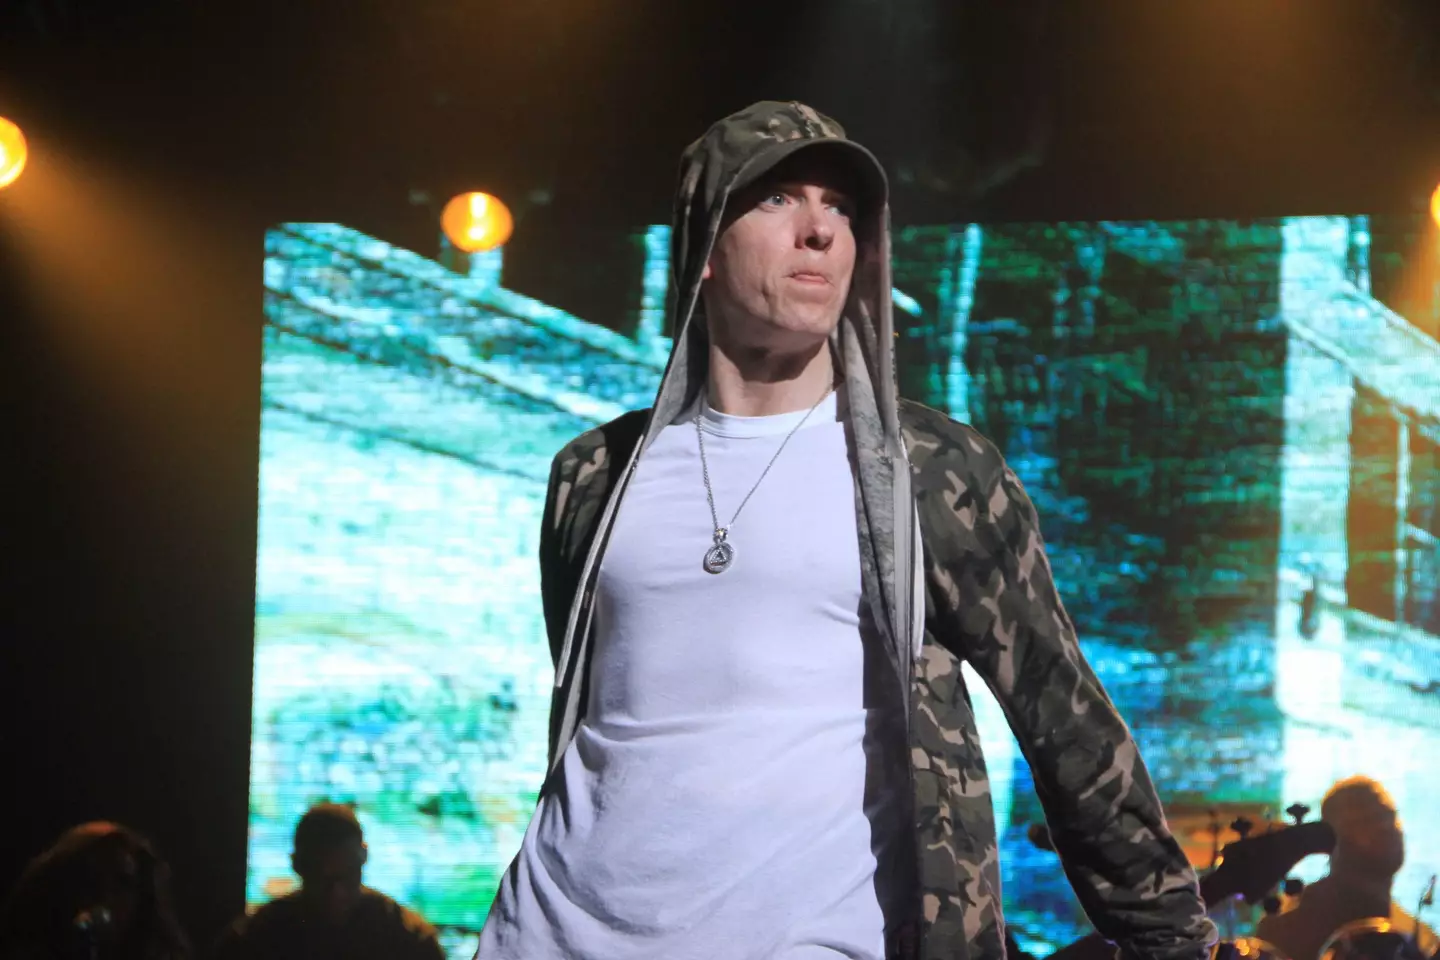 There's a weird conspiracy about Eminem's name.